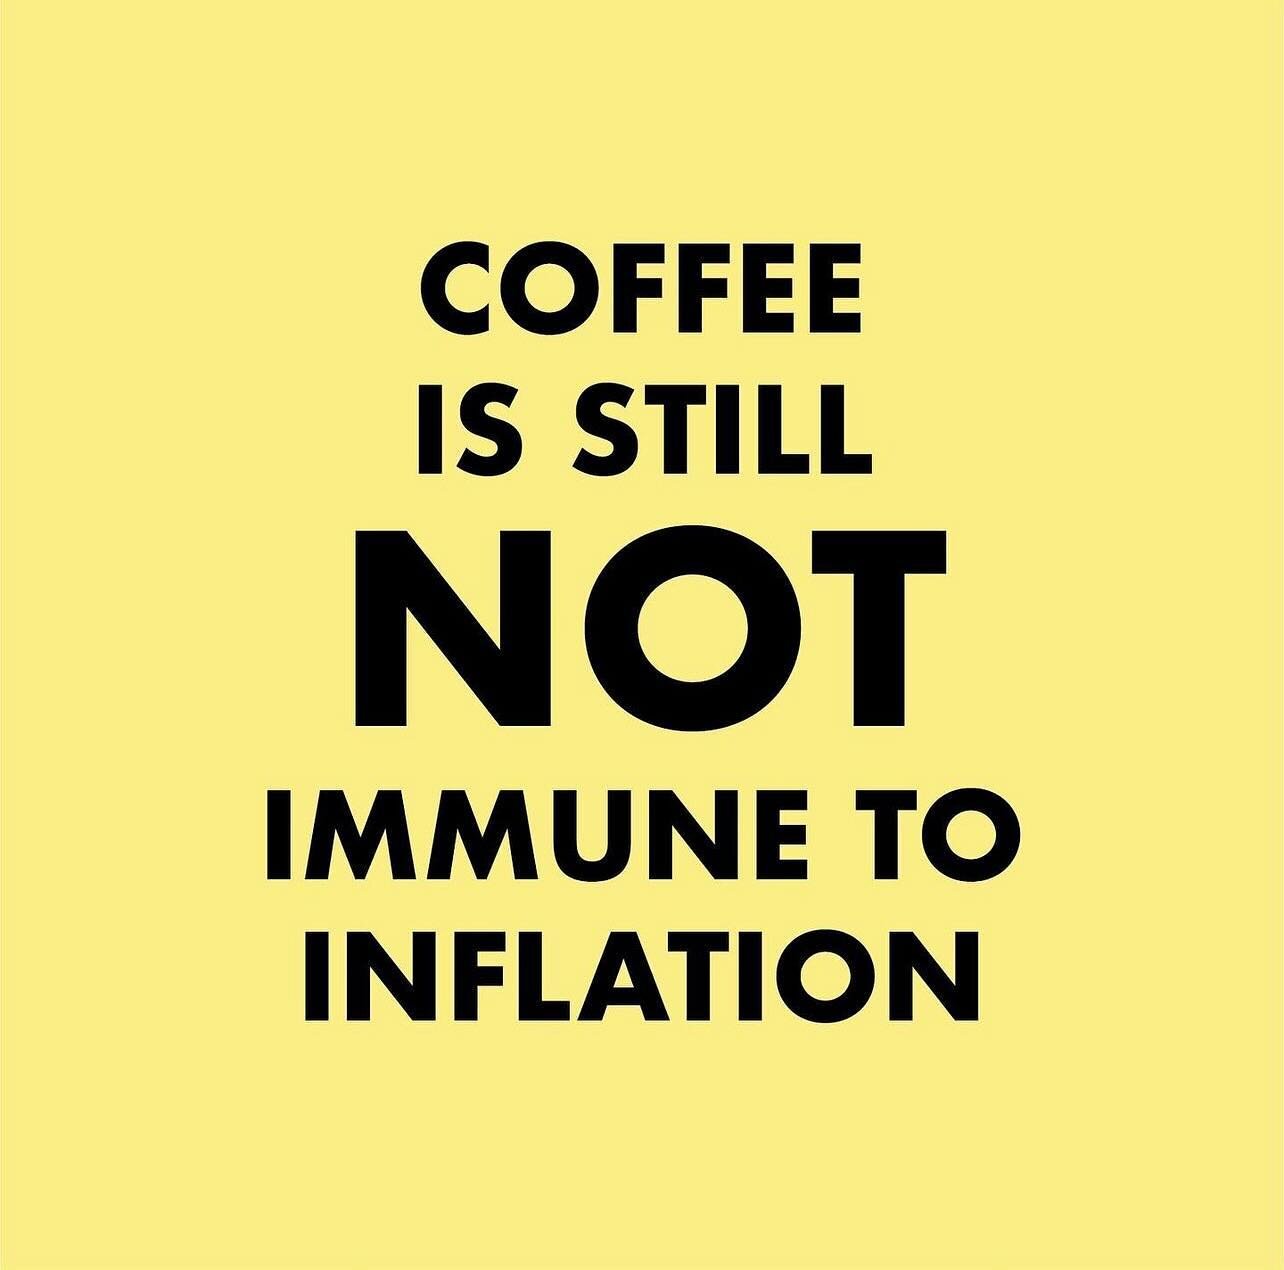 We are keeping our coffee prices the same, we are happy to do so 

However we have increased the price of alternate milks to $0.70 and macadamia will remain $1.00 

Thanks for your understanding 🤍